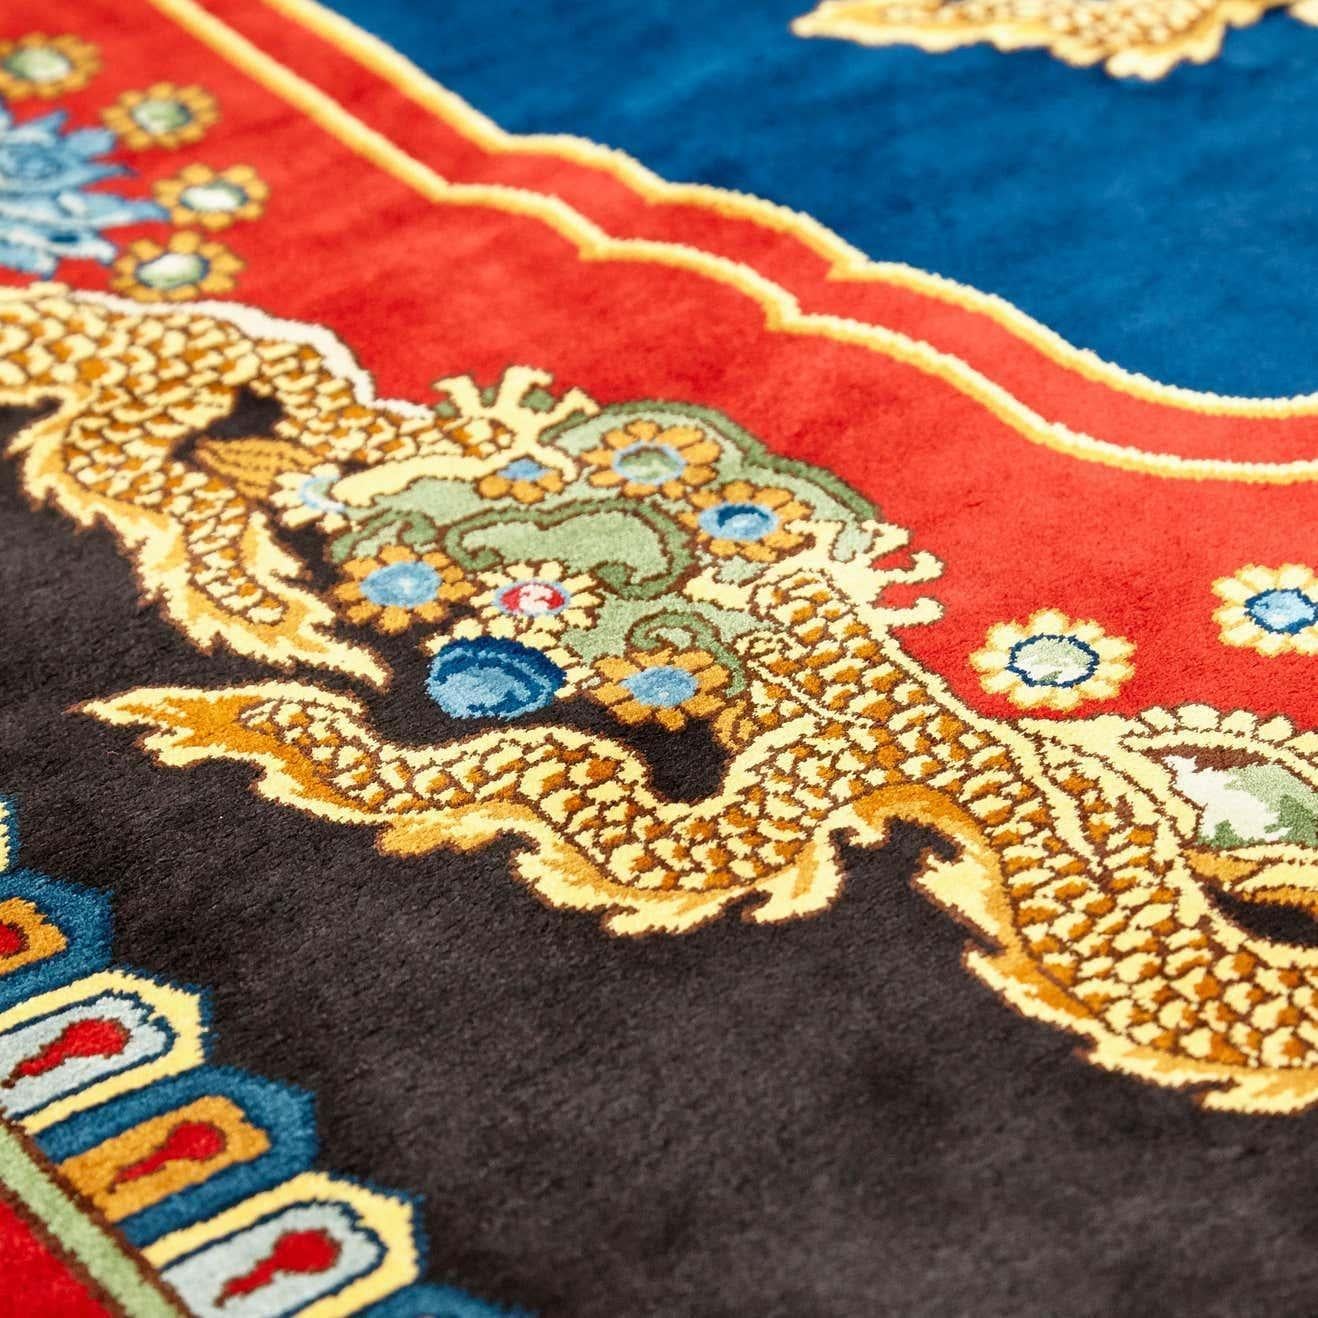 Vintage Gianni Versace Silk Rug: Mandarin's Garden Collection by Atelier Versace In Good Condition For Sale In Barcelona, Barcelona